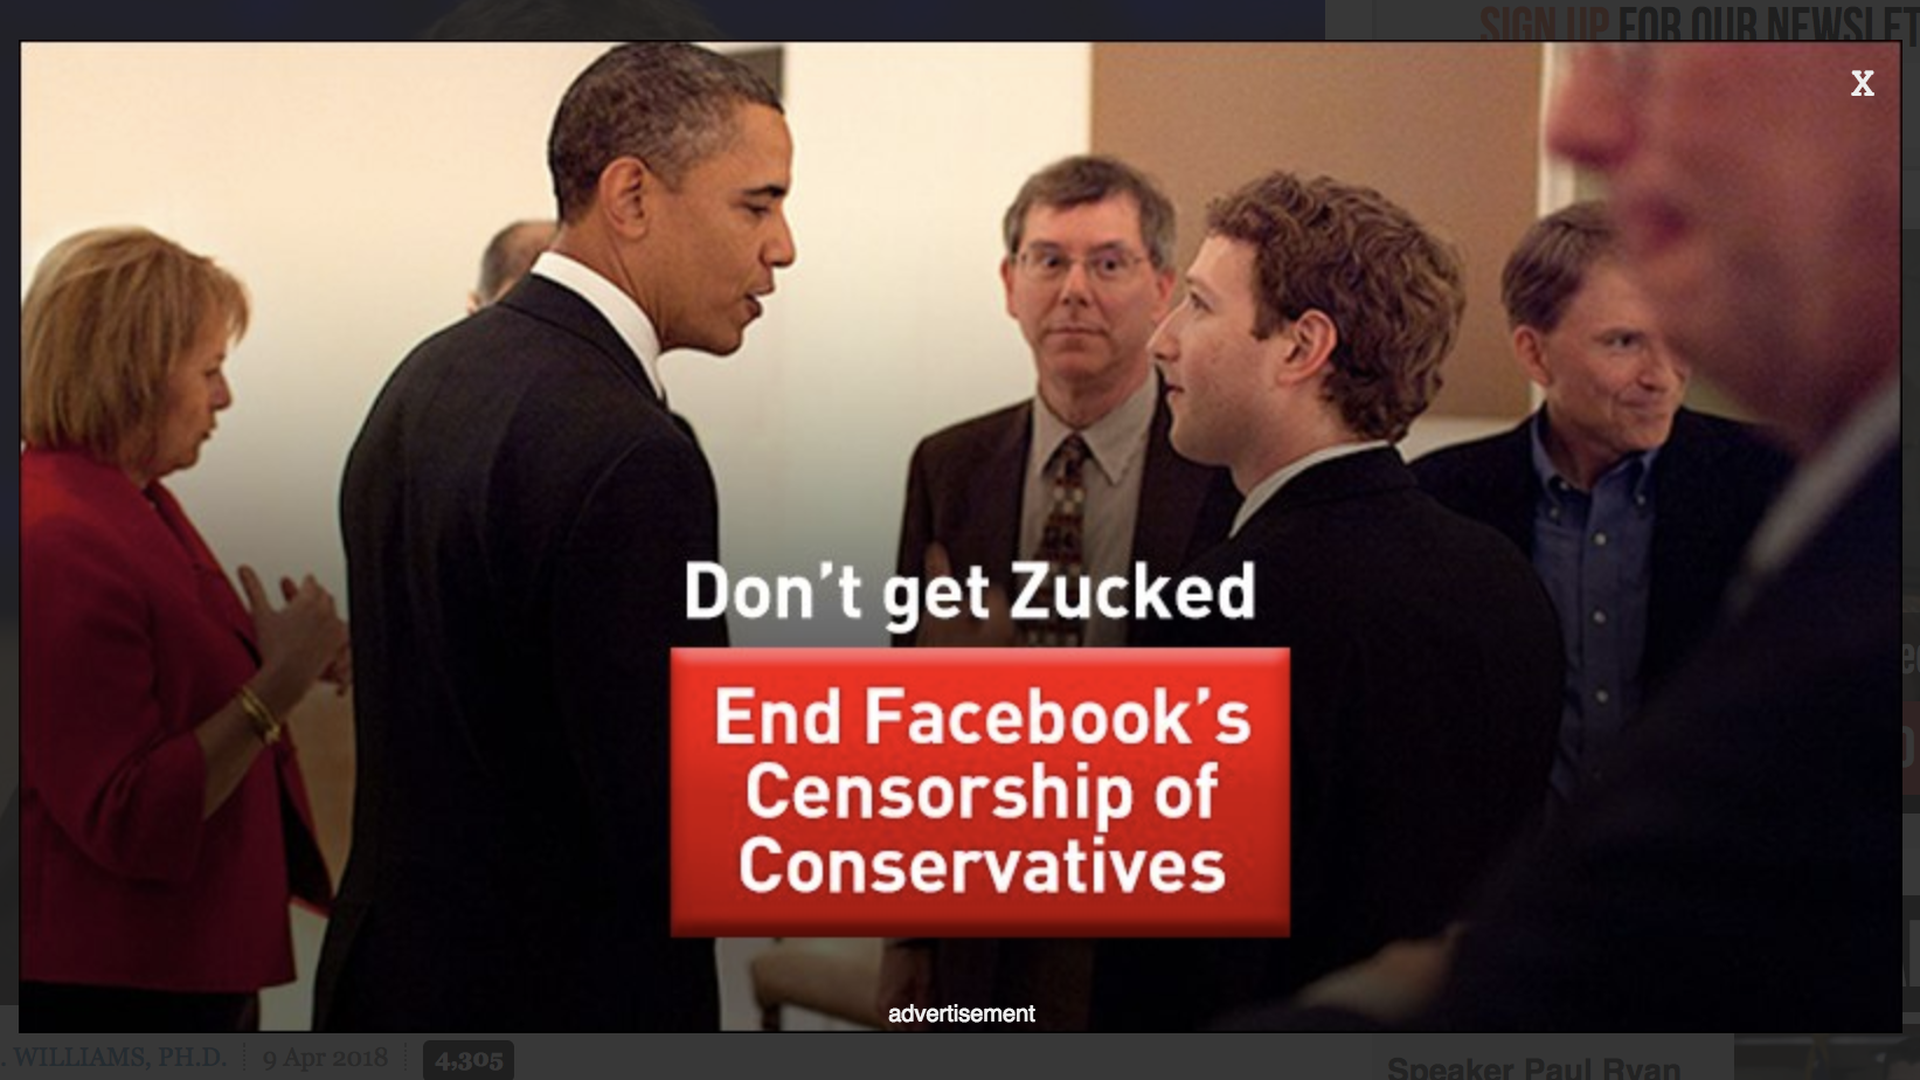 Ad reading "Don't Get Zucked"